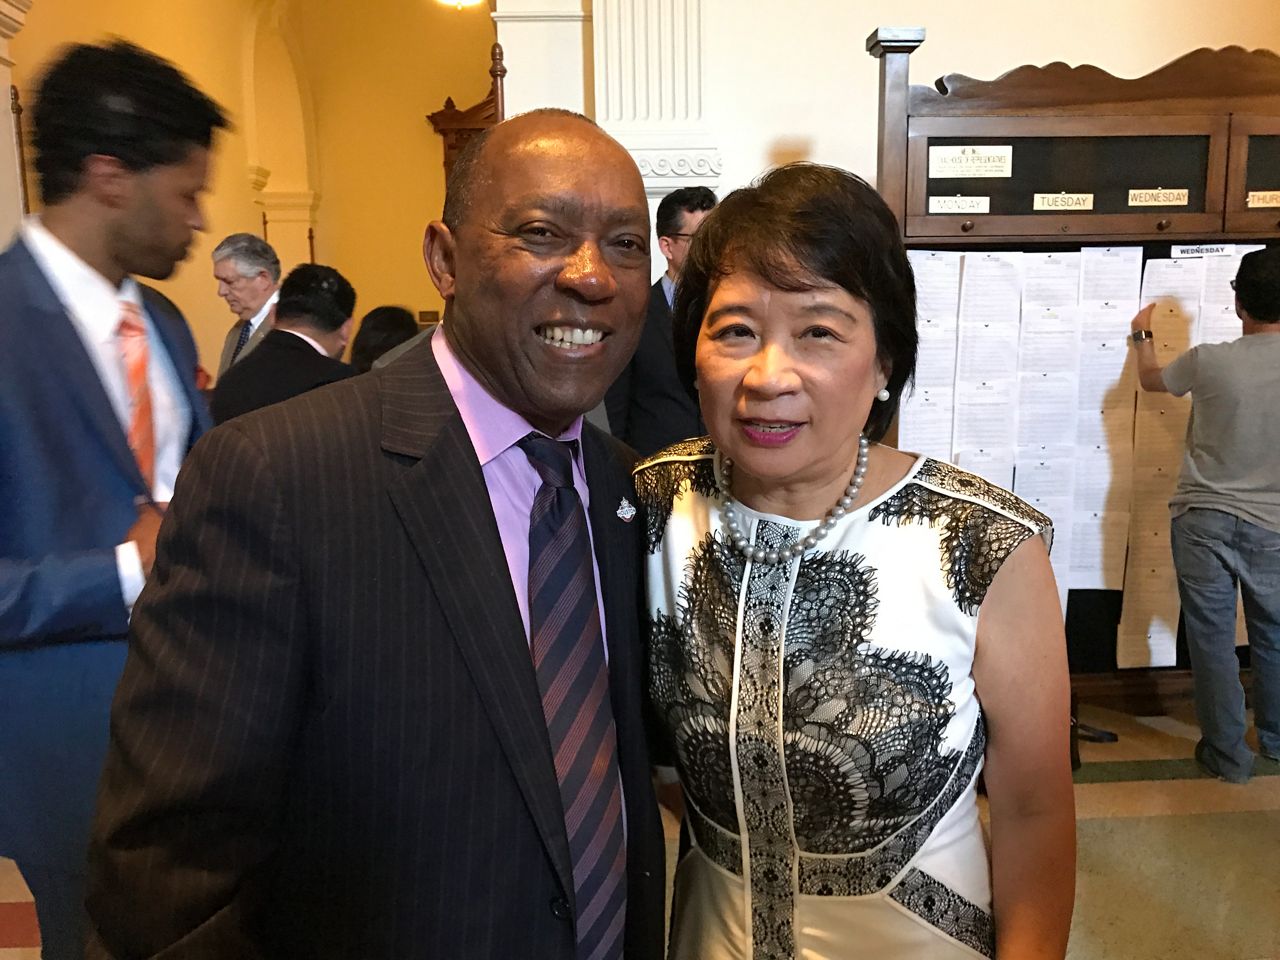 Rep. Angie Chen Button with her former colleague in the Texas House now Houston Mayor Sylvester Turner (photo credit: Rep. Angie Chen Button)